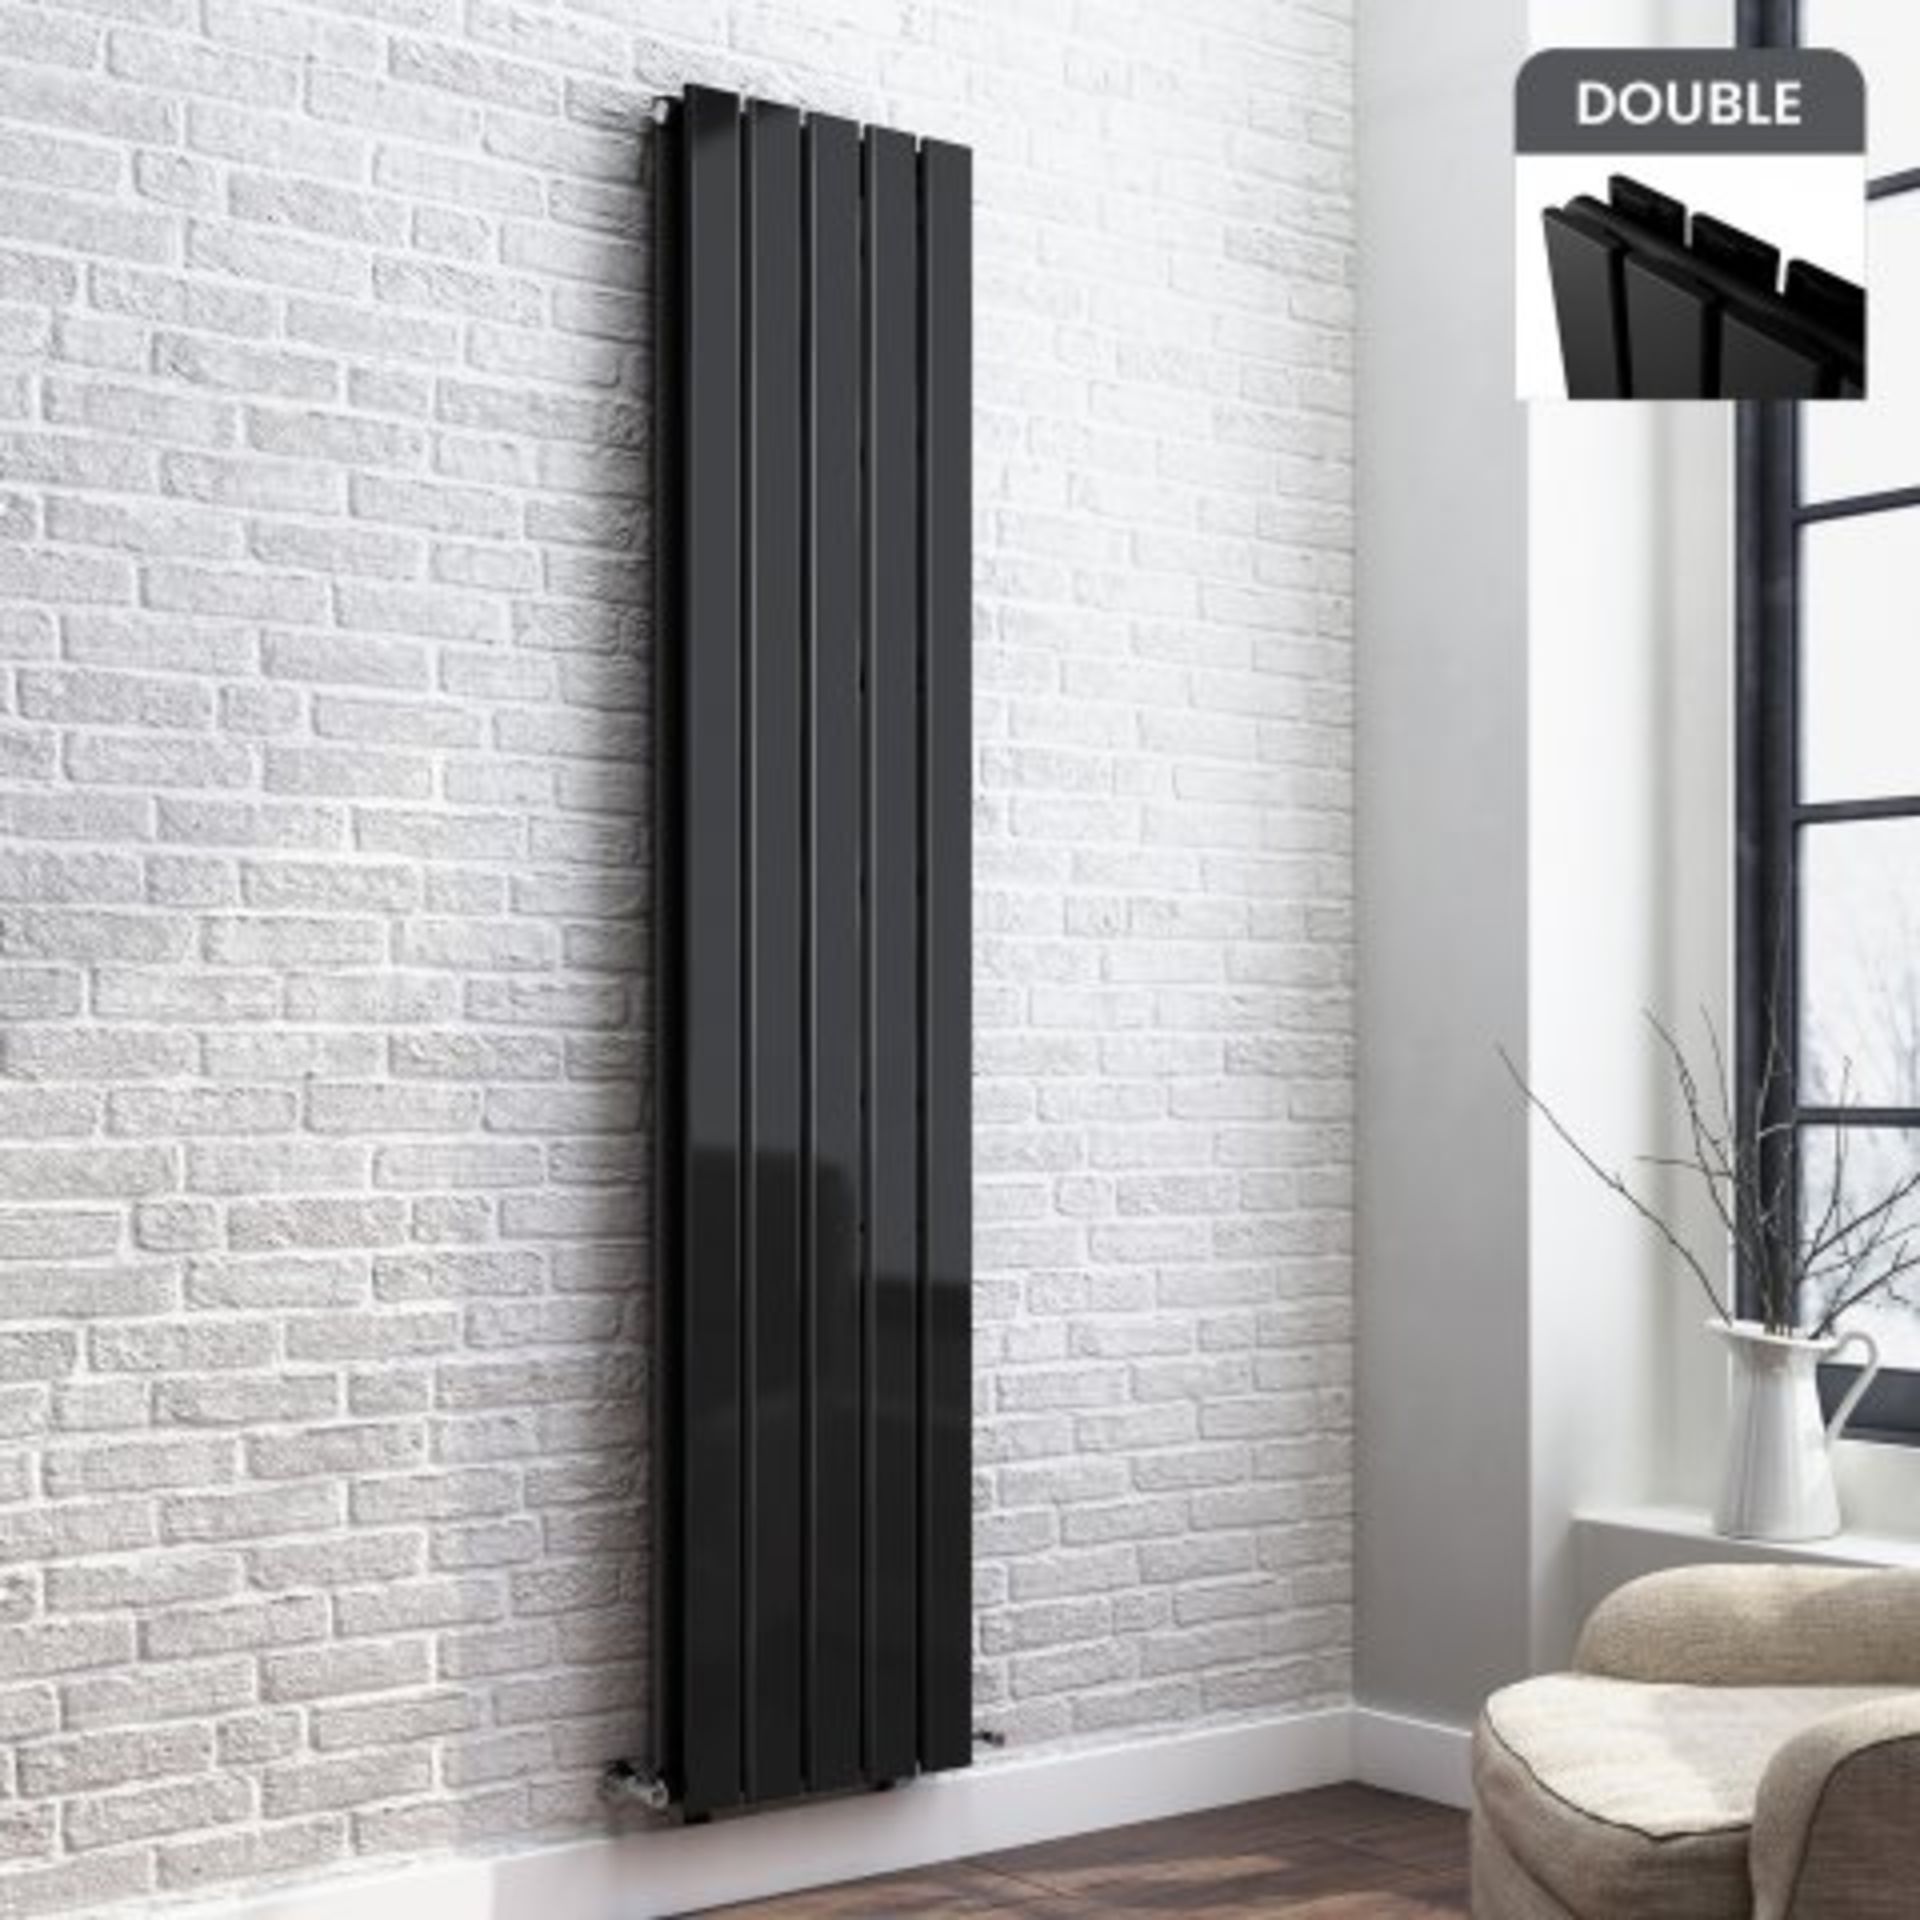 (P90) 1800x382mm Gloss Black Double Flat Panel Vertical Radiator. RRP £499.99. Our Thera Flat